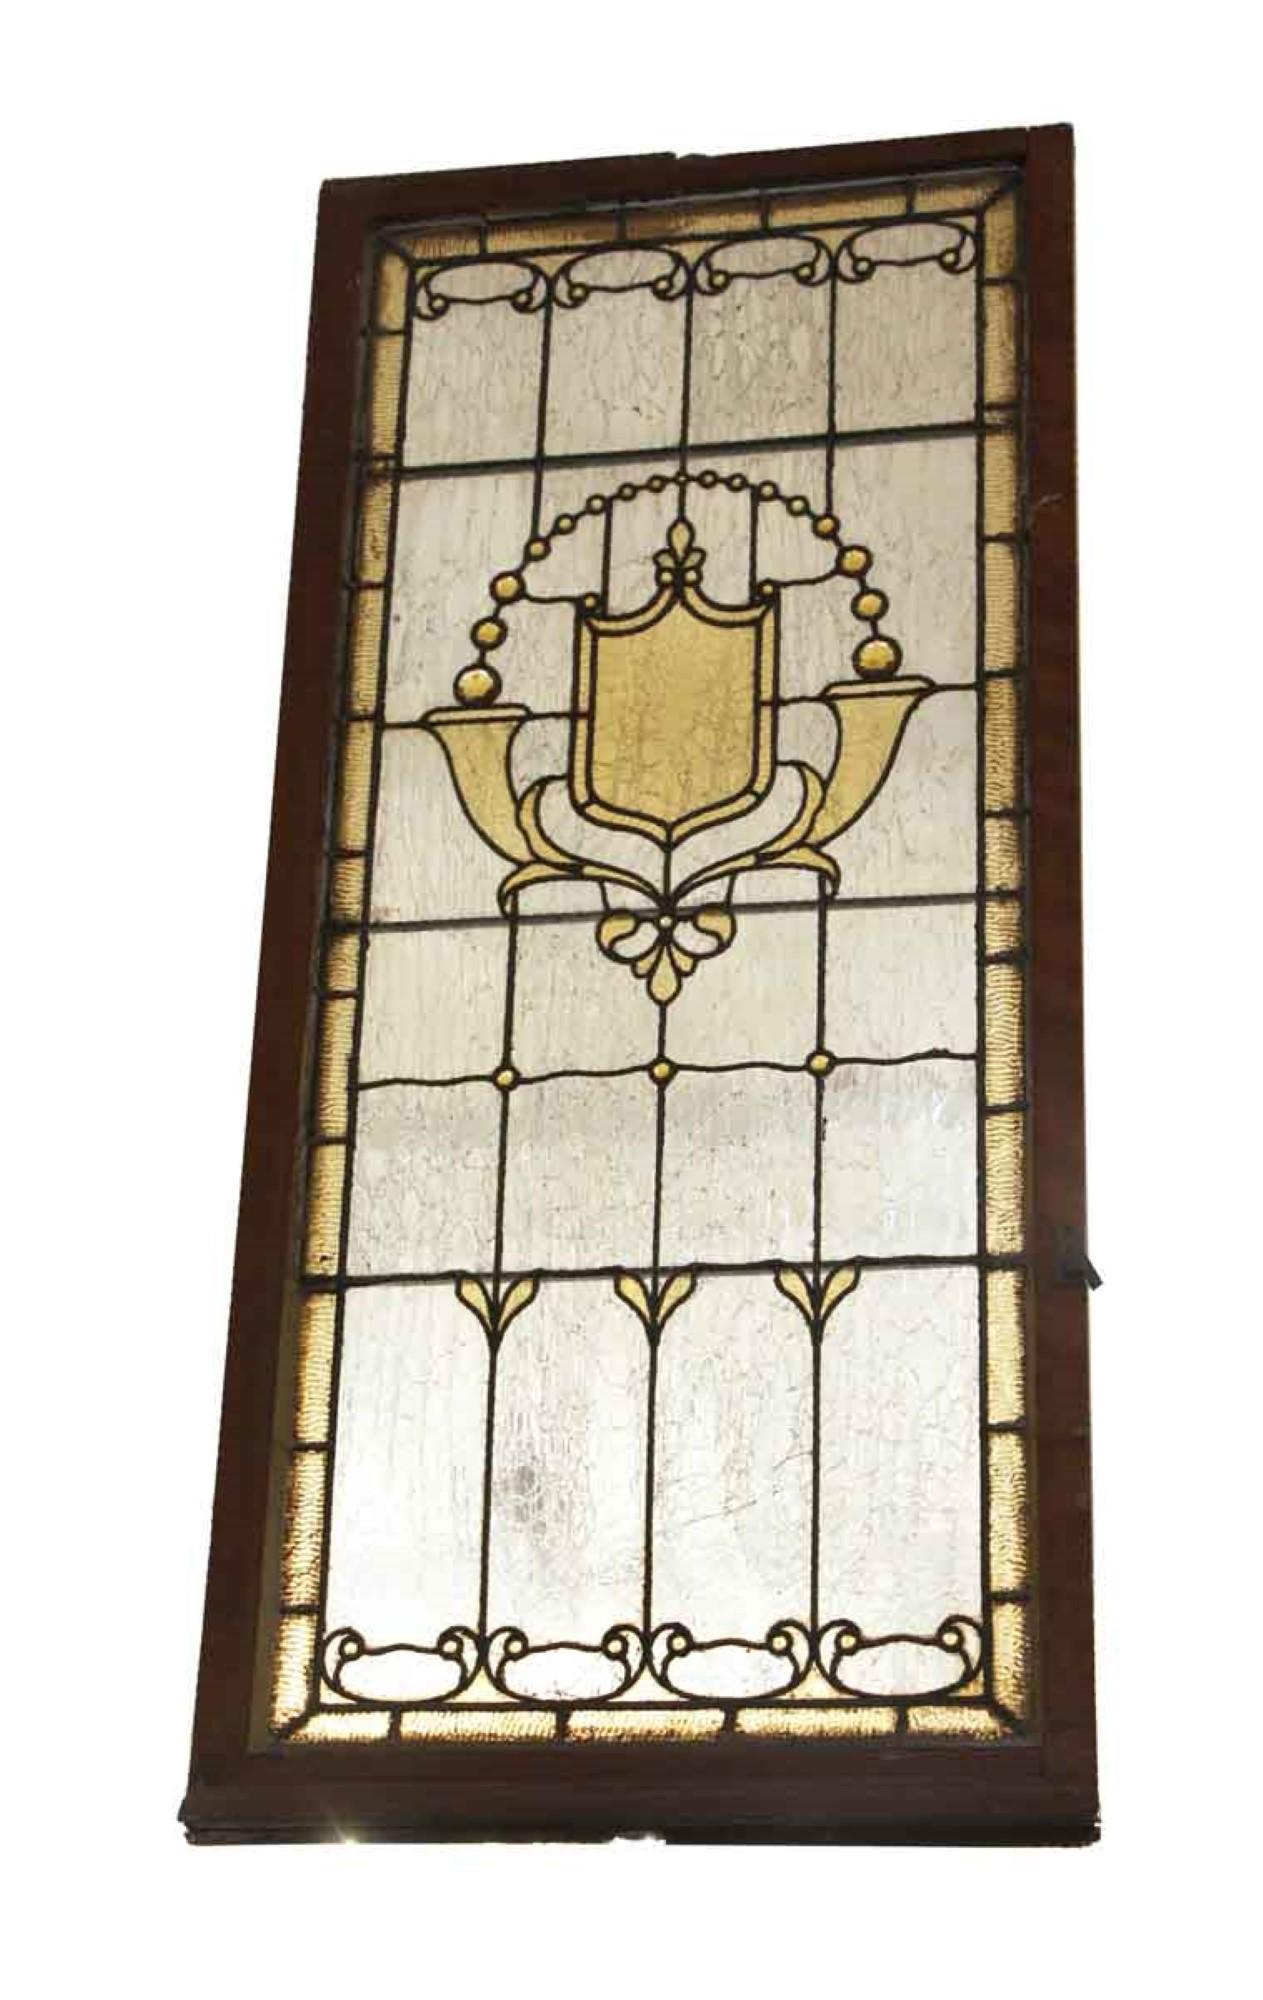 1930s antique jeweled amber stained and textured glass windows with a shield motif from 22nd and Park Ave South in NYC. Minor cracks. Please see photos. Priced as a pair. This can be seen at our 333 West 52nd St location in the Theater District West